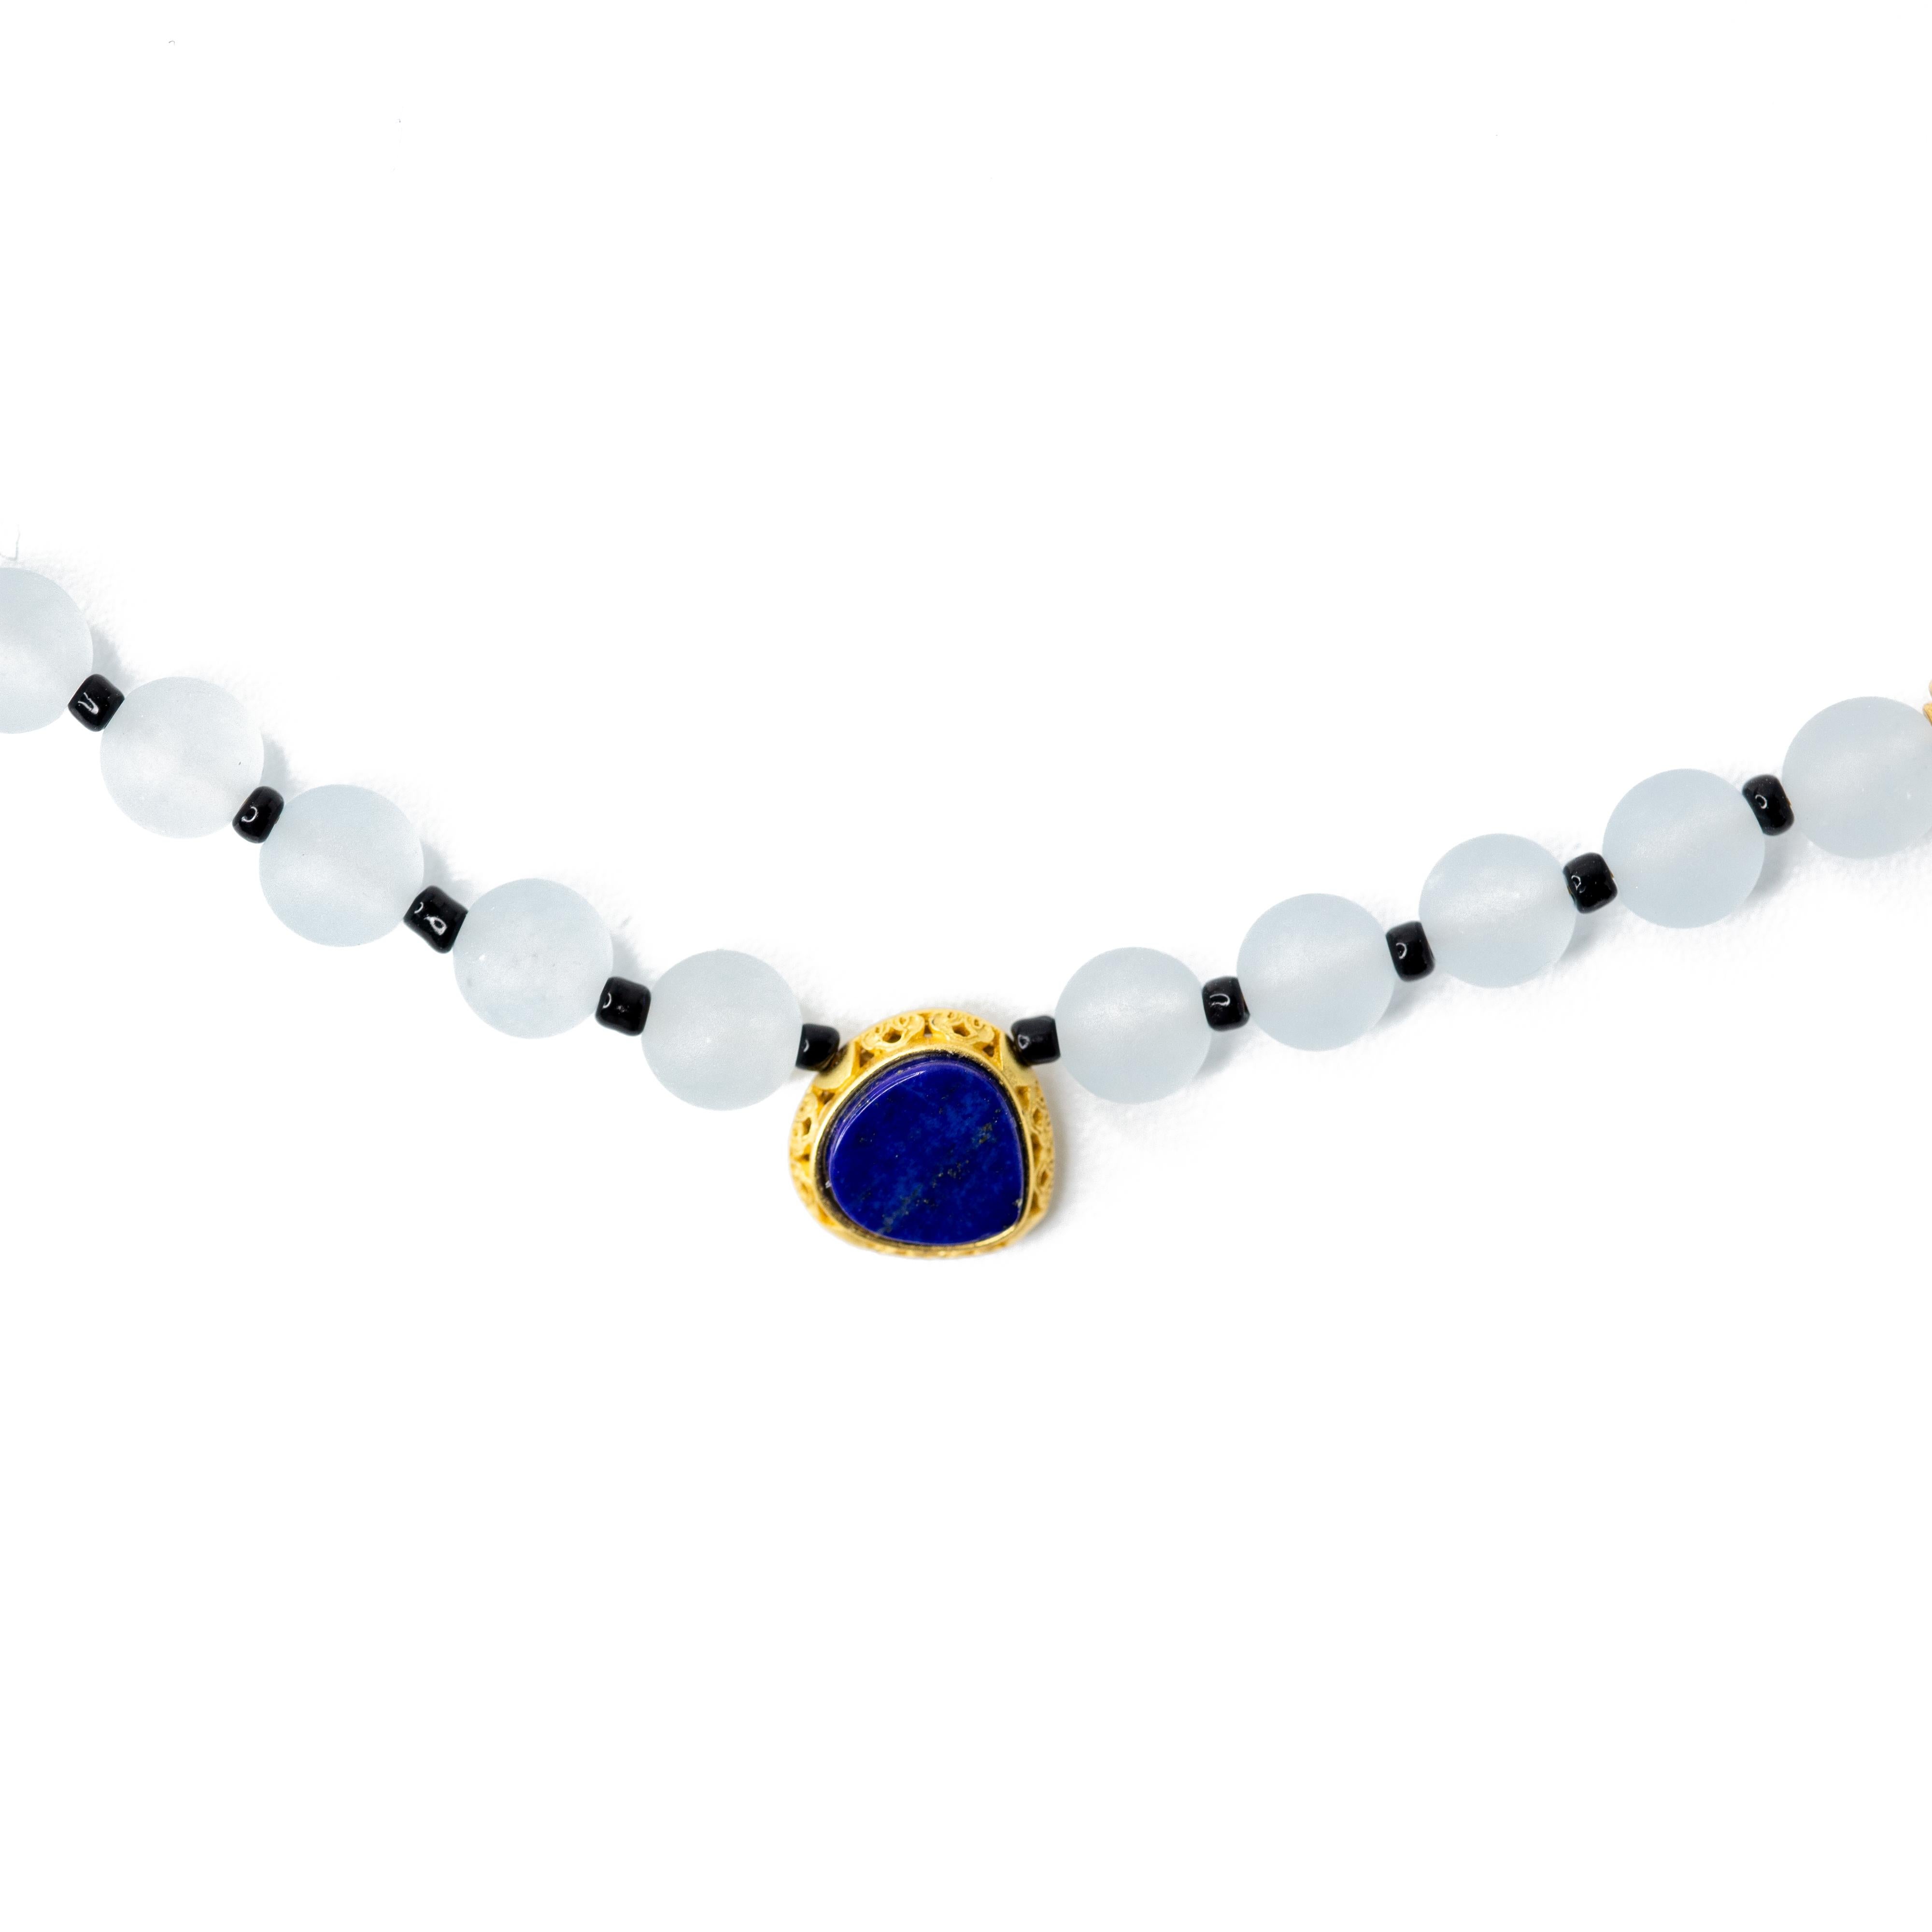 Women's Lapis Lazuli, Chalcedony, Gold Beaded Necklace by Bombyx House For Sale